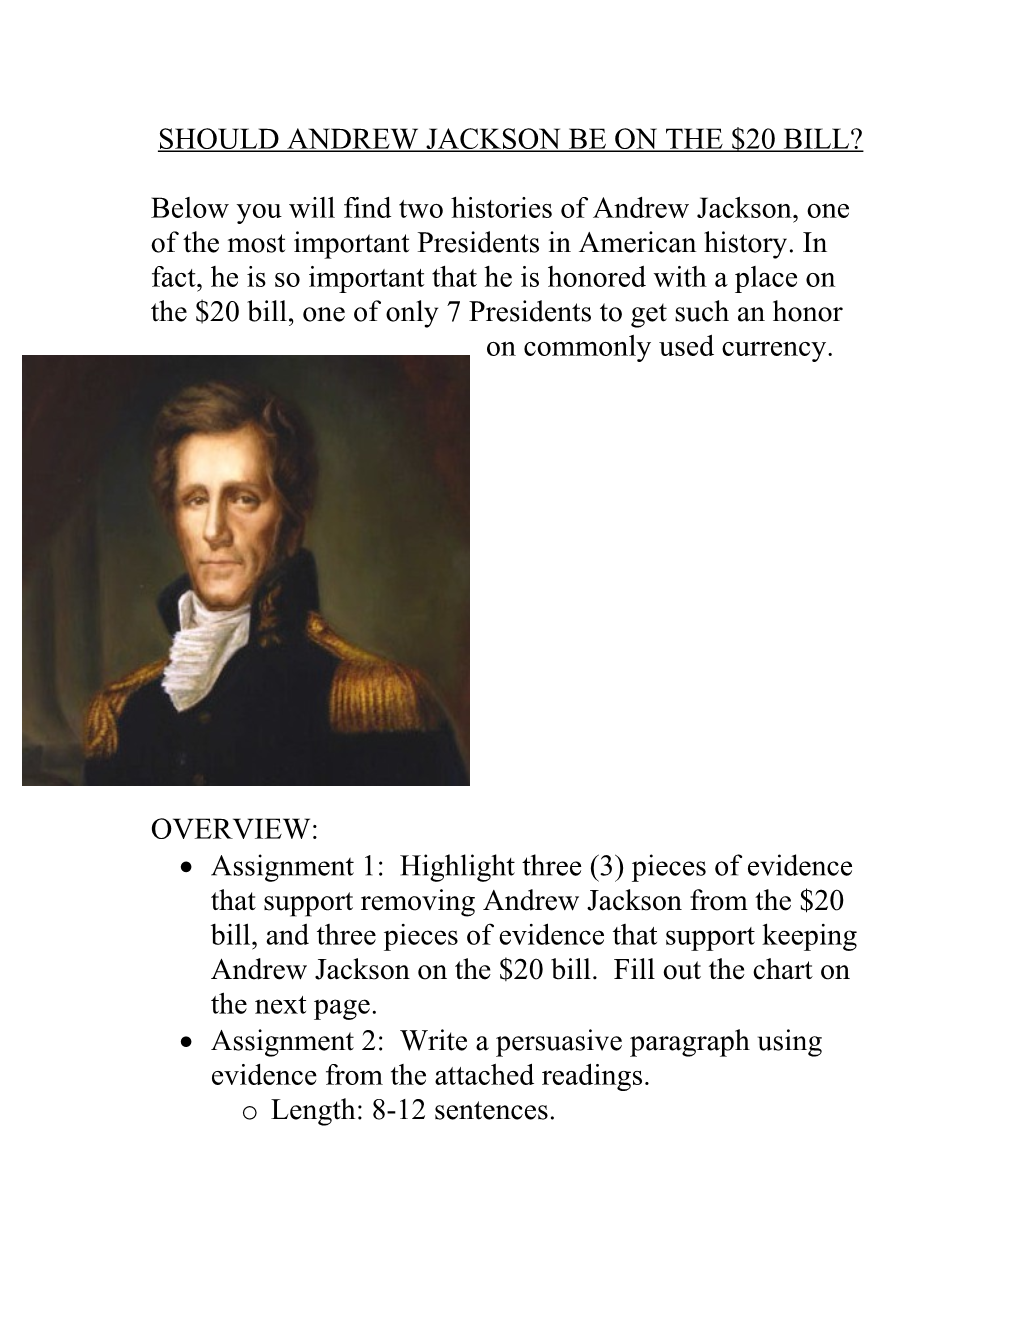 Below, You Will Find Two Histories of Andrew Jackson, One of the Most Important Presidents